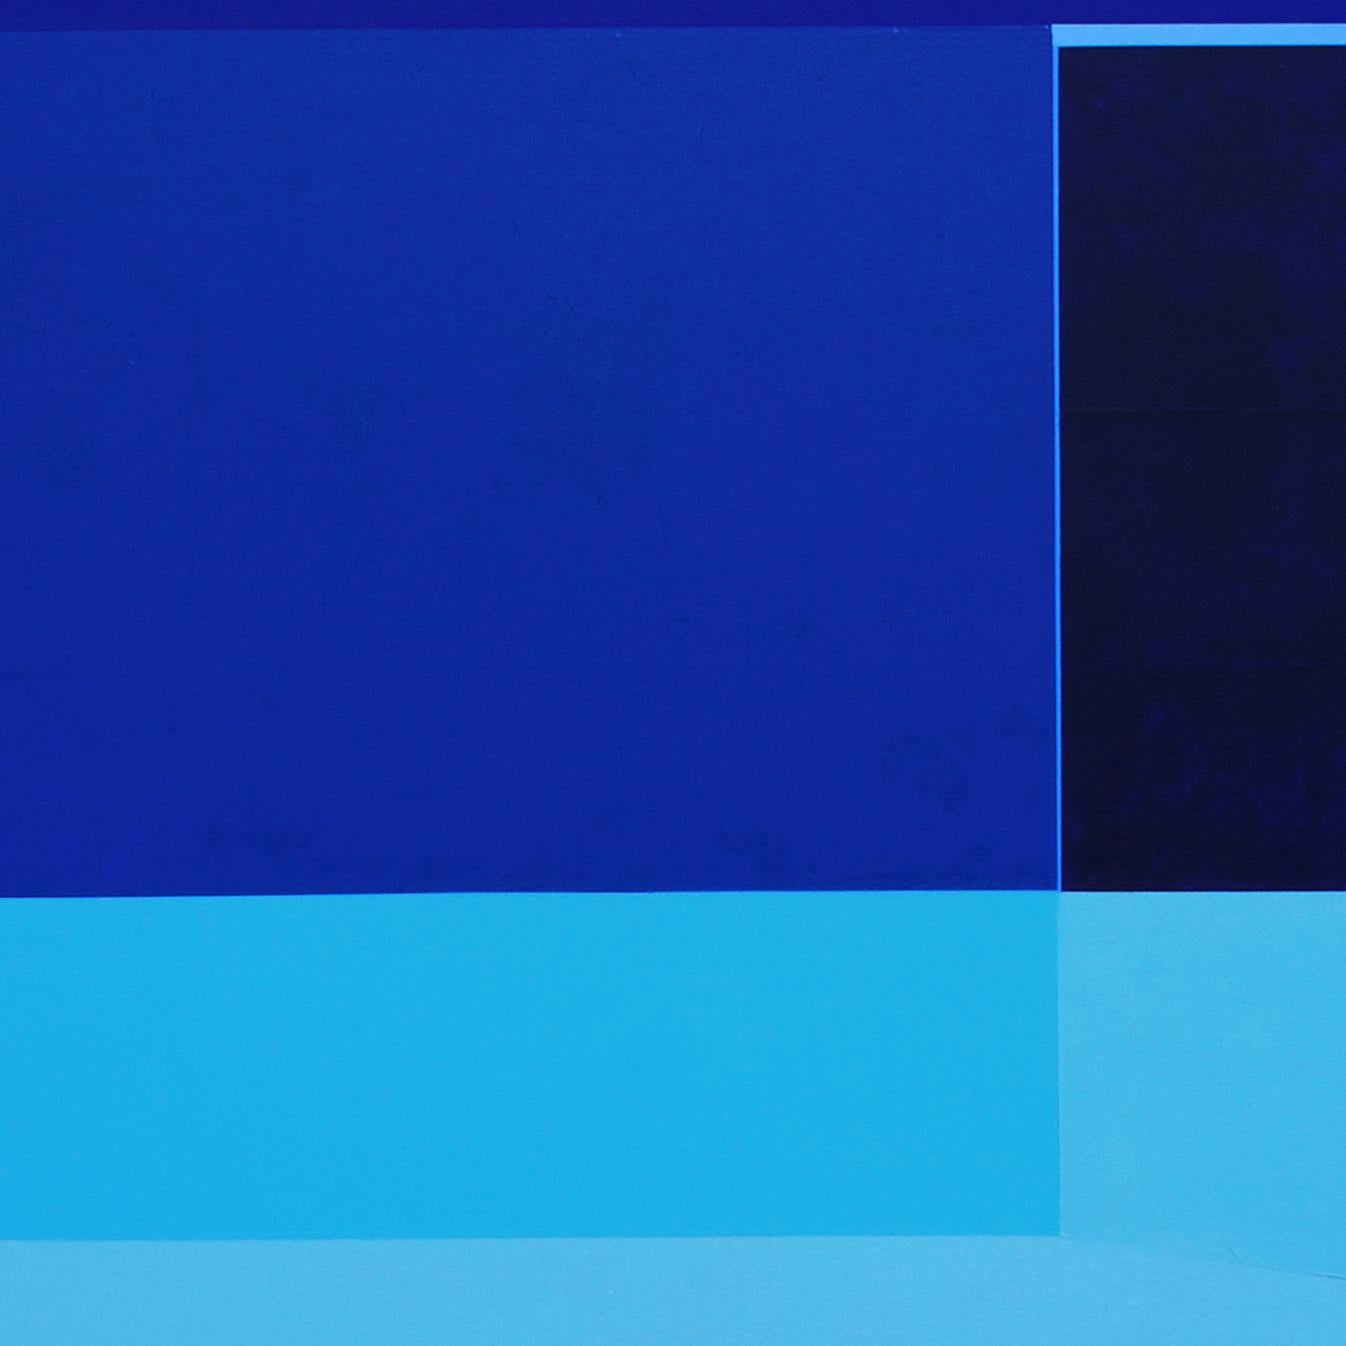 Here to There (Abstrakte Malerei) (Blau), Abstract Painting, von Macyn Bolt